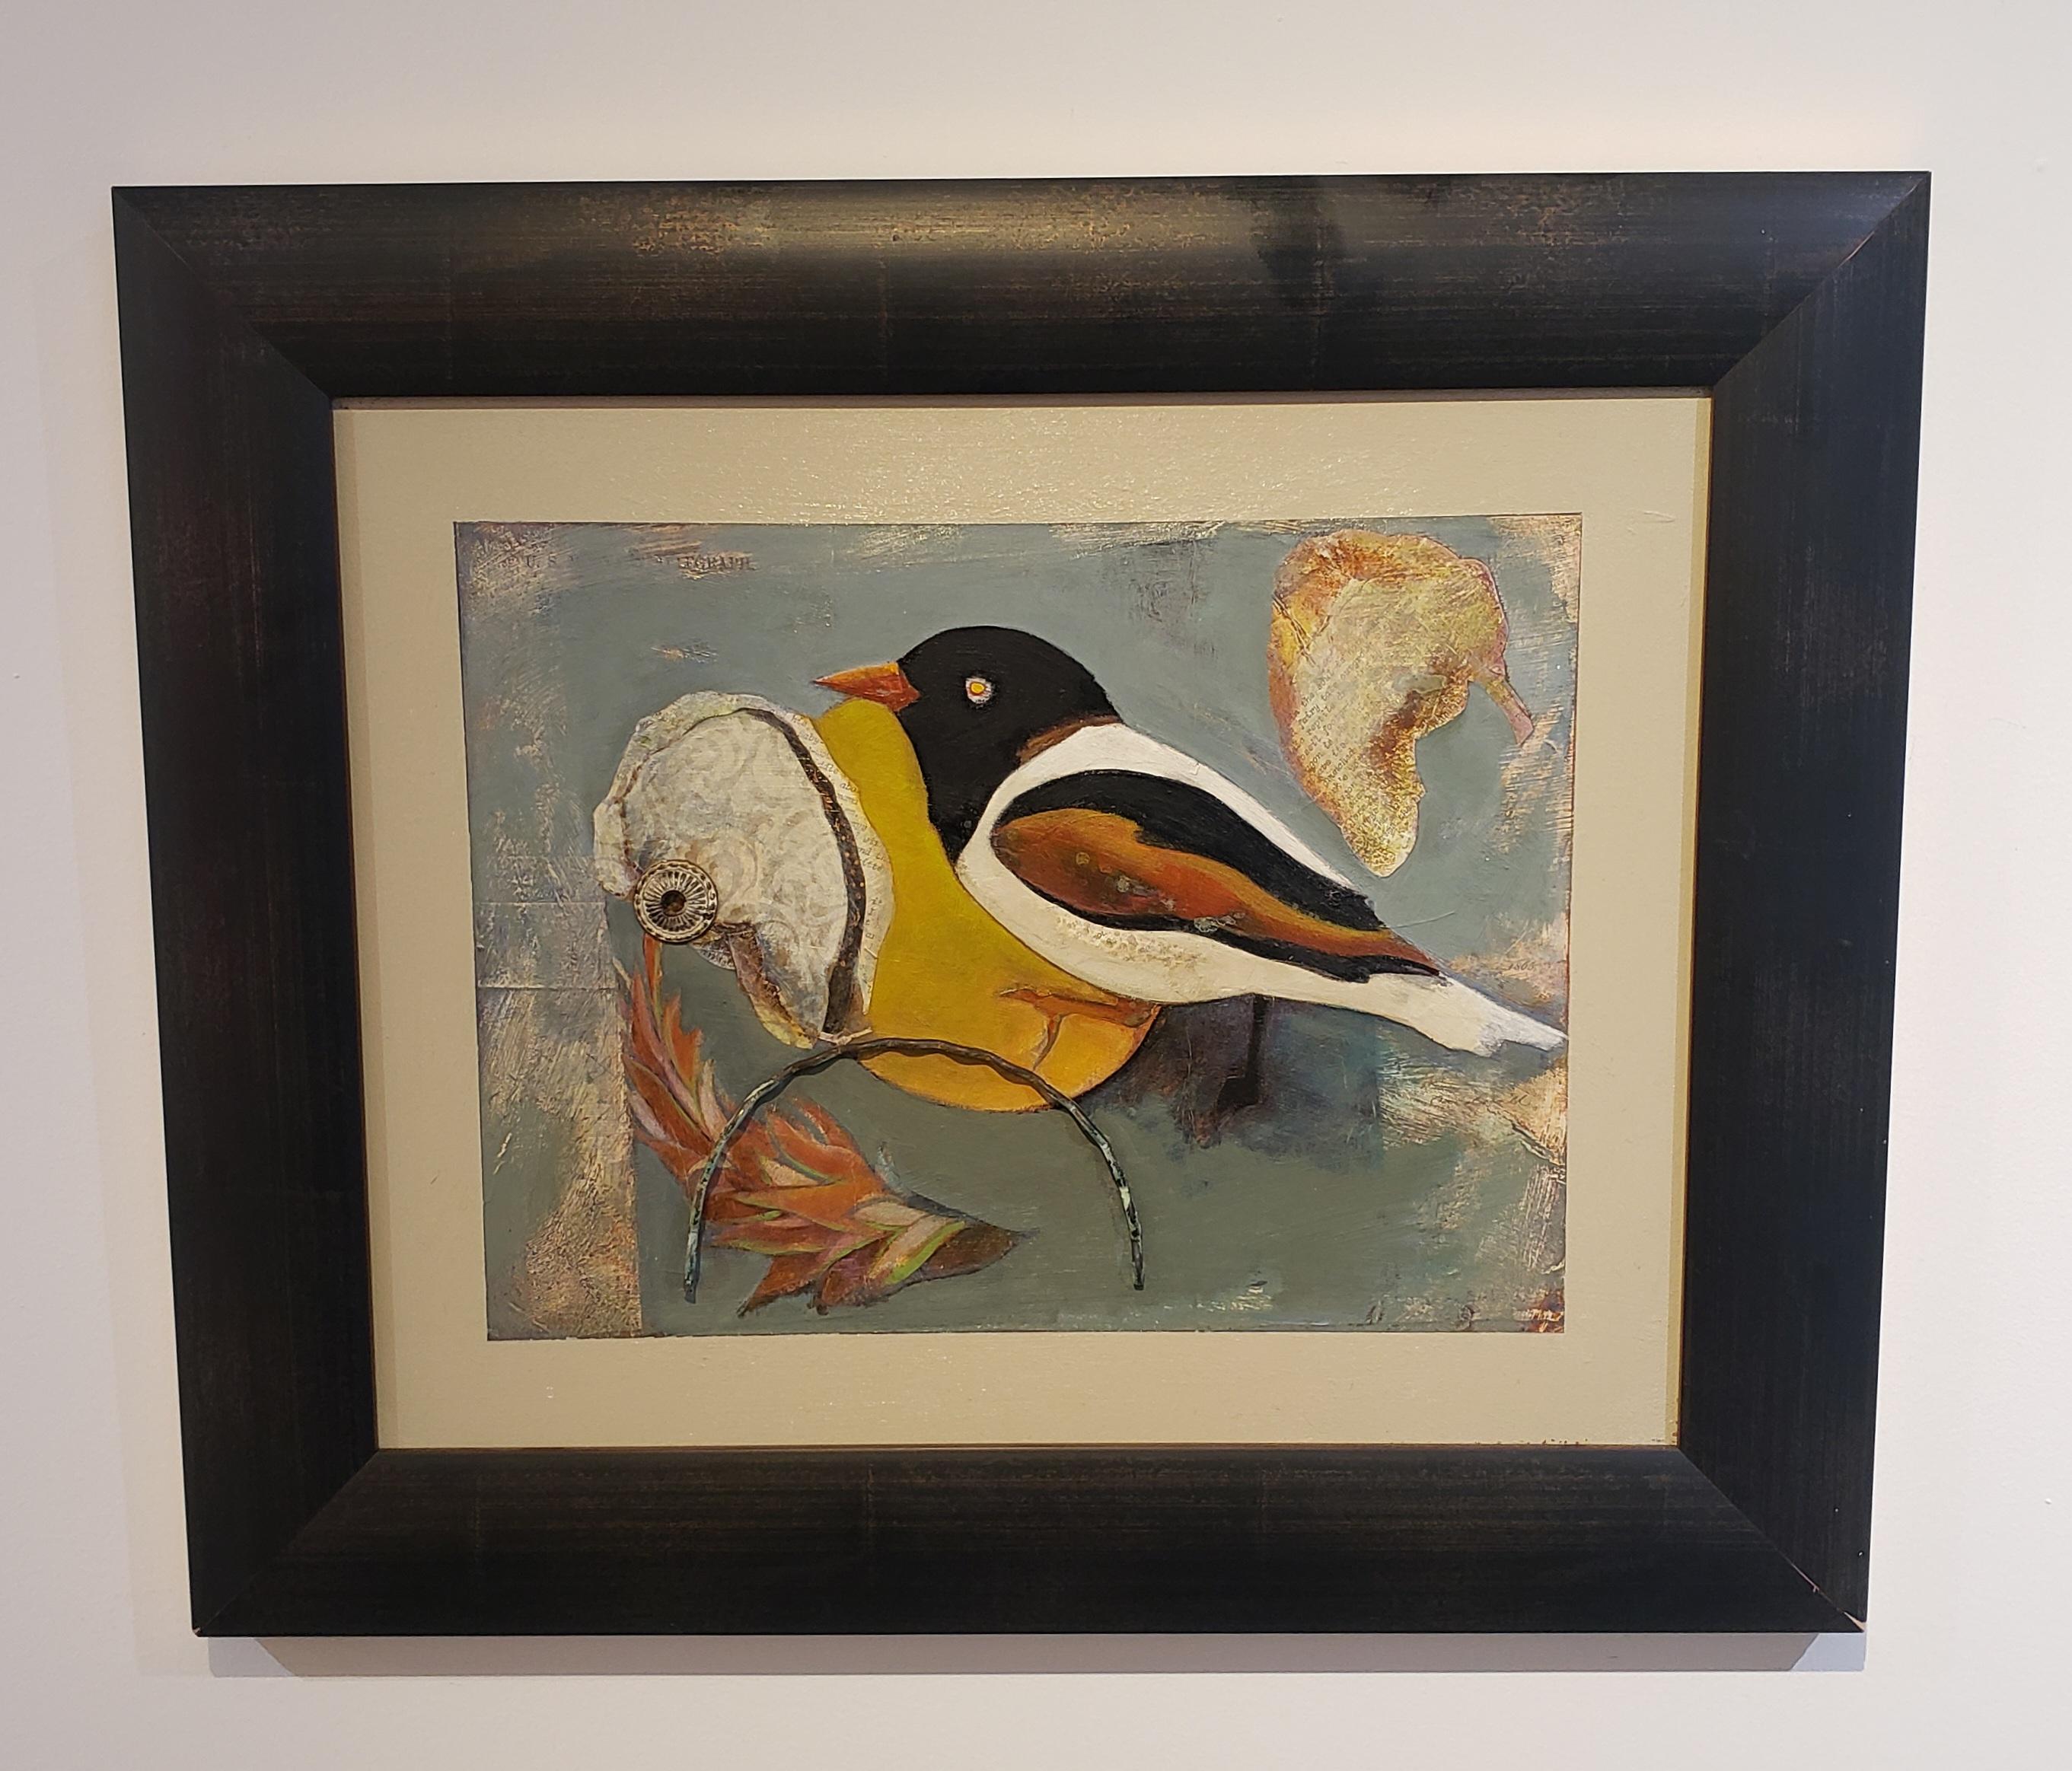 Perched, Bird Painting, Southwest, 25x21 Framed, Whimsical, Mixed Media, Oil - American Realist Mixed Media Art by Anne Embree